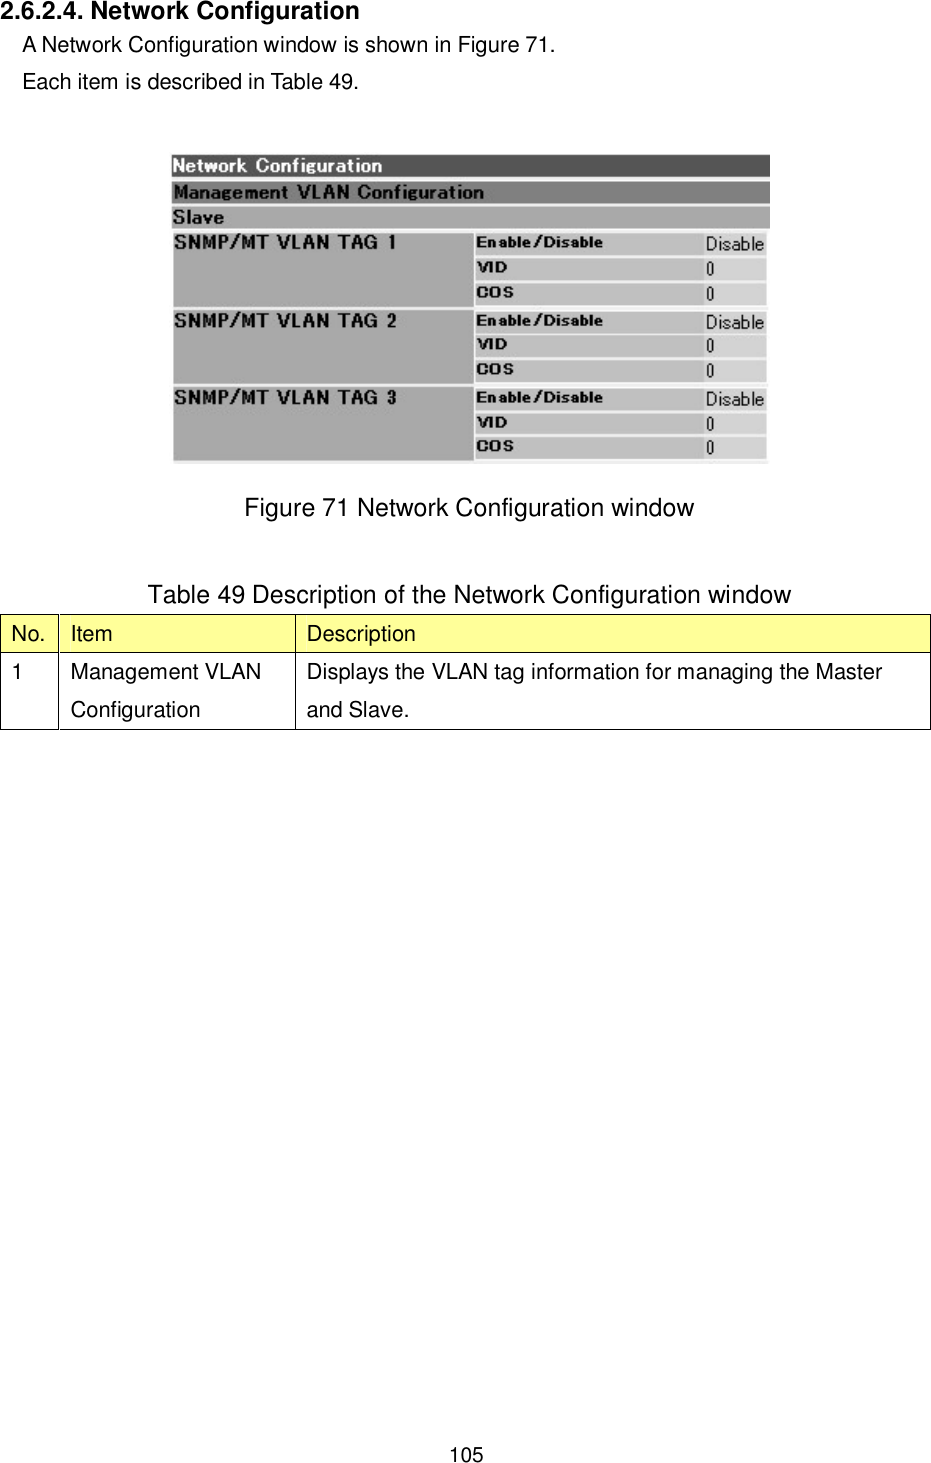    105  2.6.2.4. Network Configuration A Network Configuration window is shown in Figure 71. Each item is described in Table 49.   Figure 71 Network Configuration window  Table 49 Description of the Network Configuration window No. Item  Description 1  Management VLAN Configuration Displays the VLAN tag information for managing the Master and Slave.  